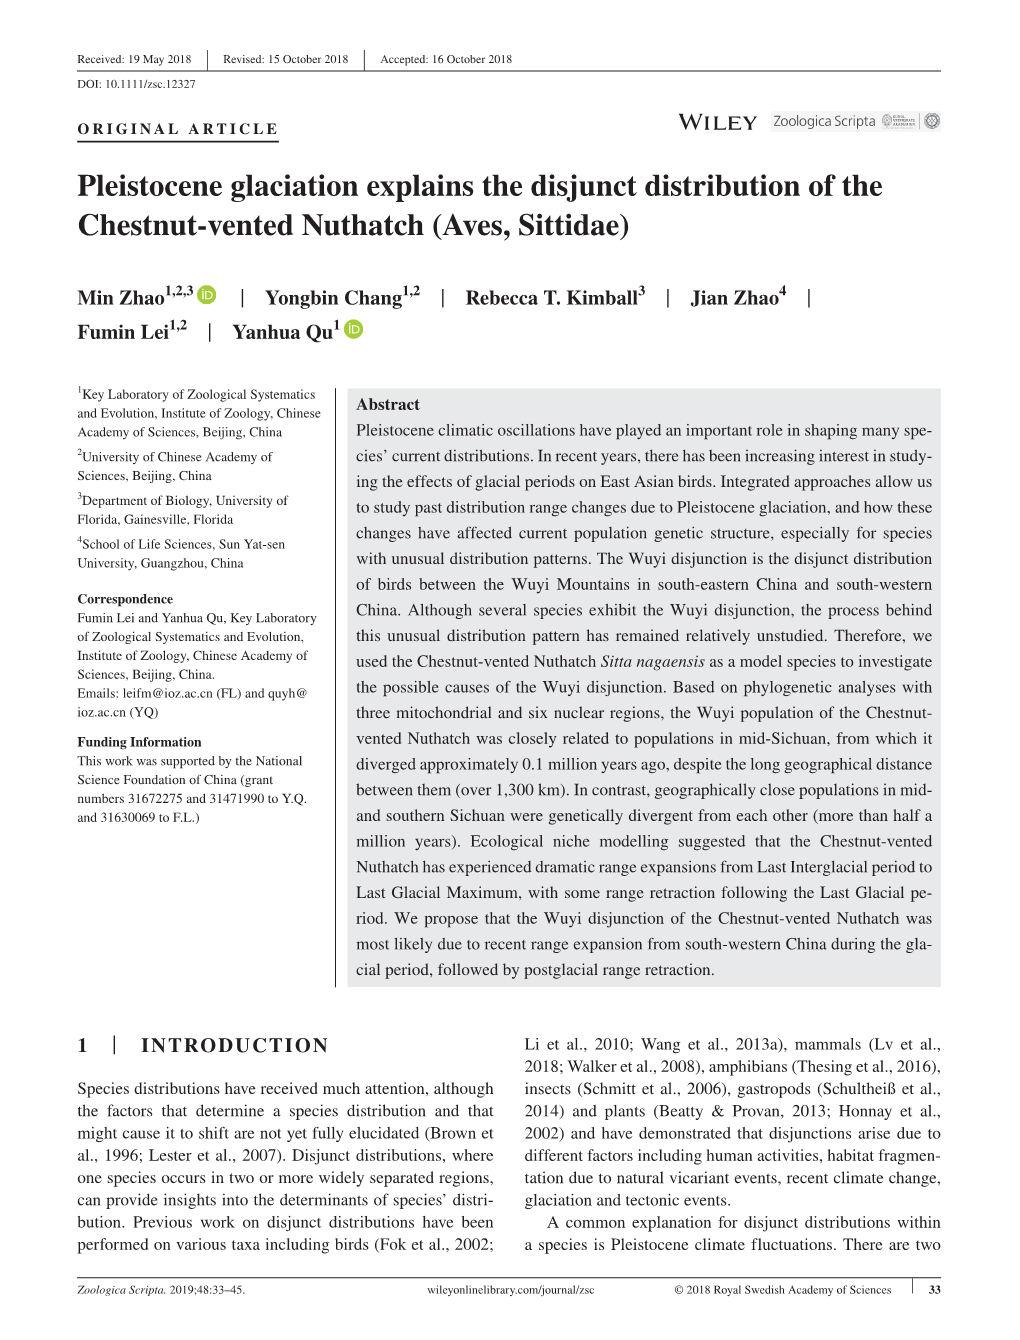 Pleistocene Glaciation Explains the Disjunct Distribution of the Chestnut‐Vented Nuthatch (Aves, Sittidae)